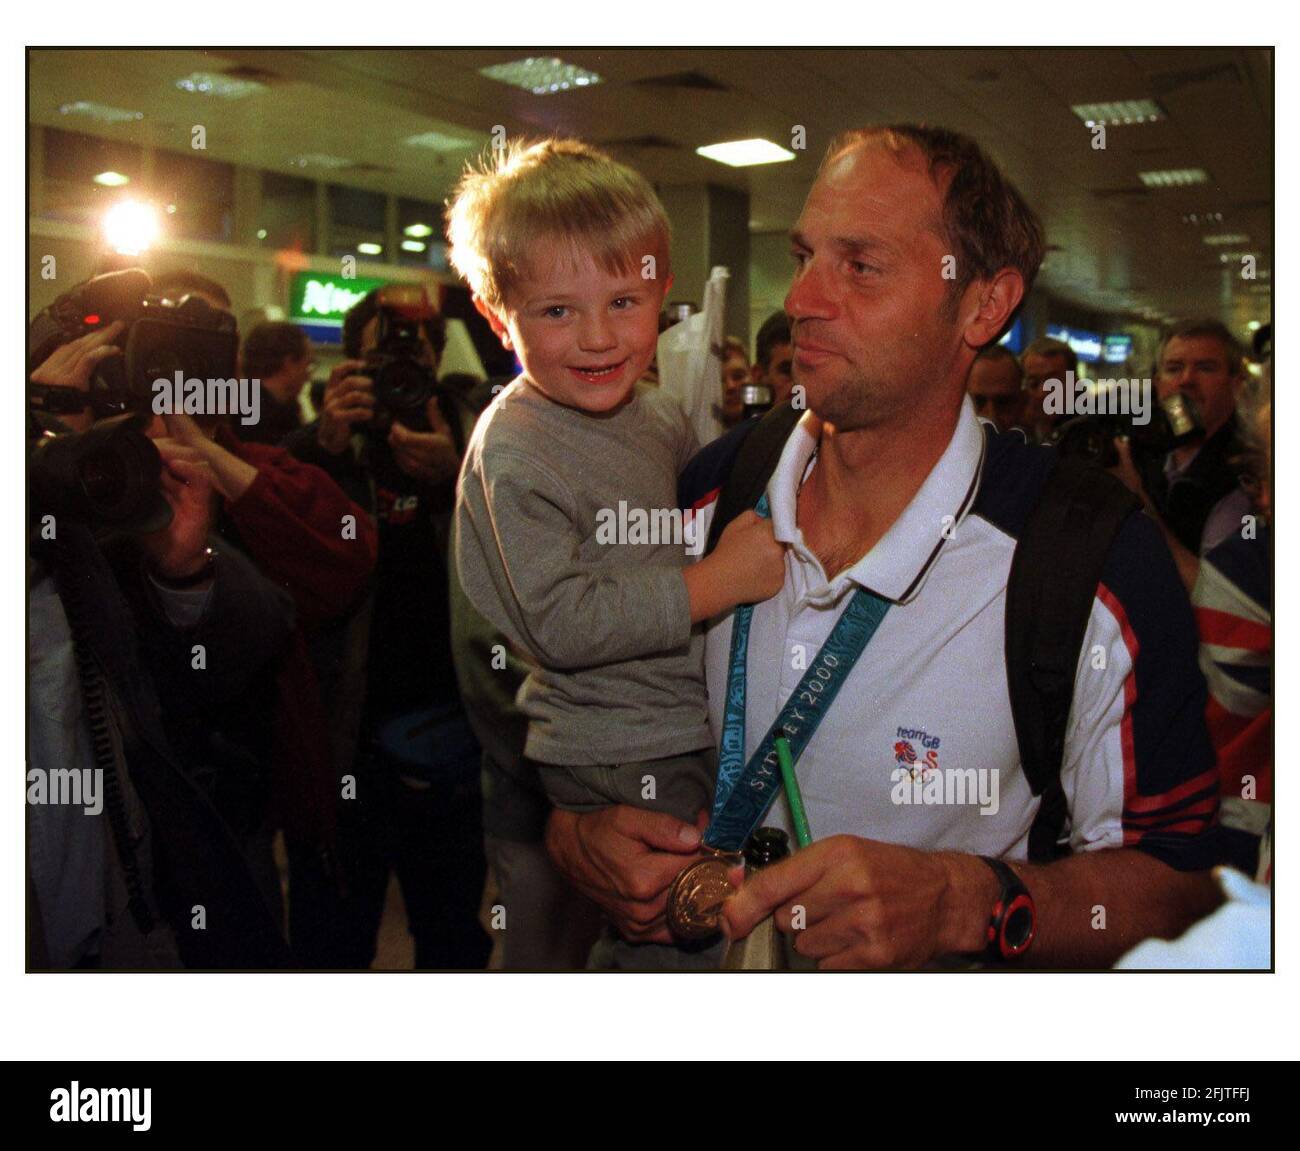 British Olympic Medalists arrive home at Heathrow airport....Steve Redgrave Coxless Four Rowing. Stock Photo